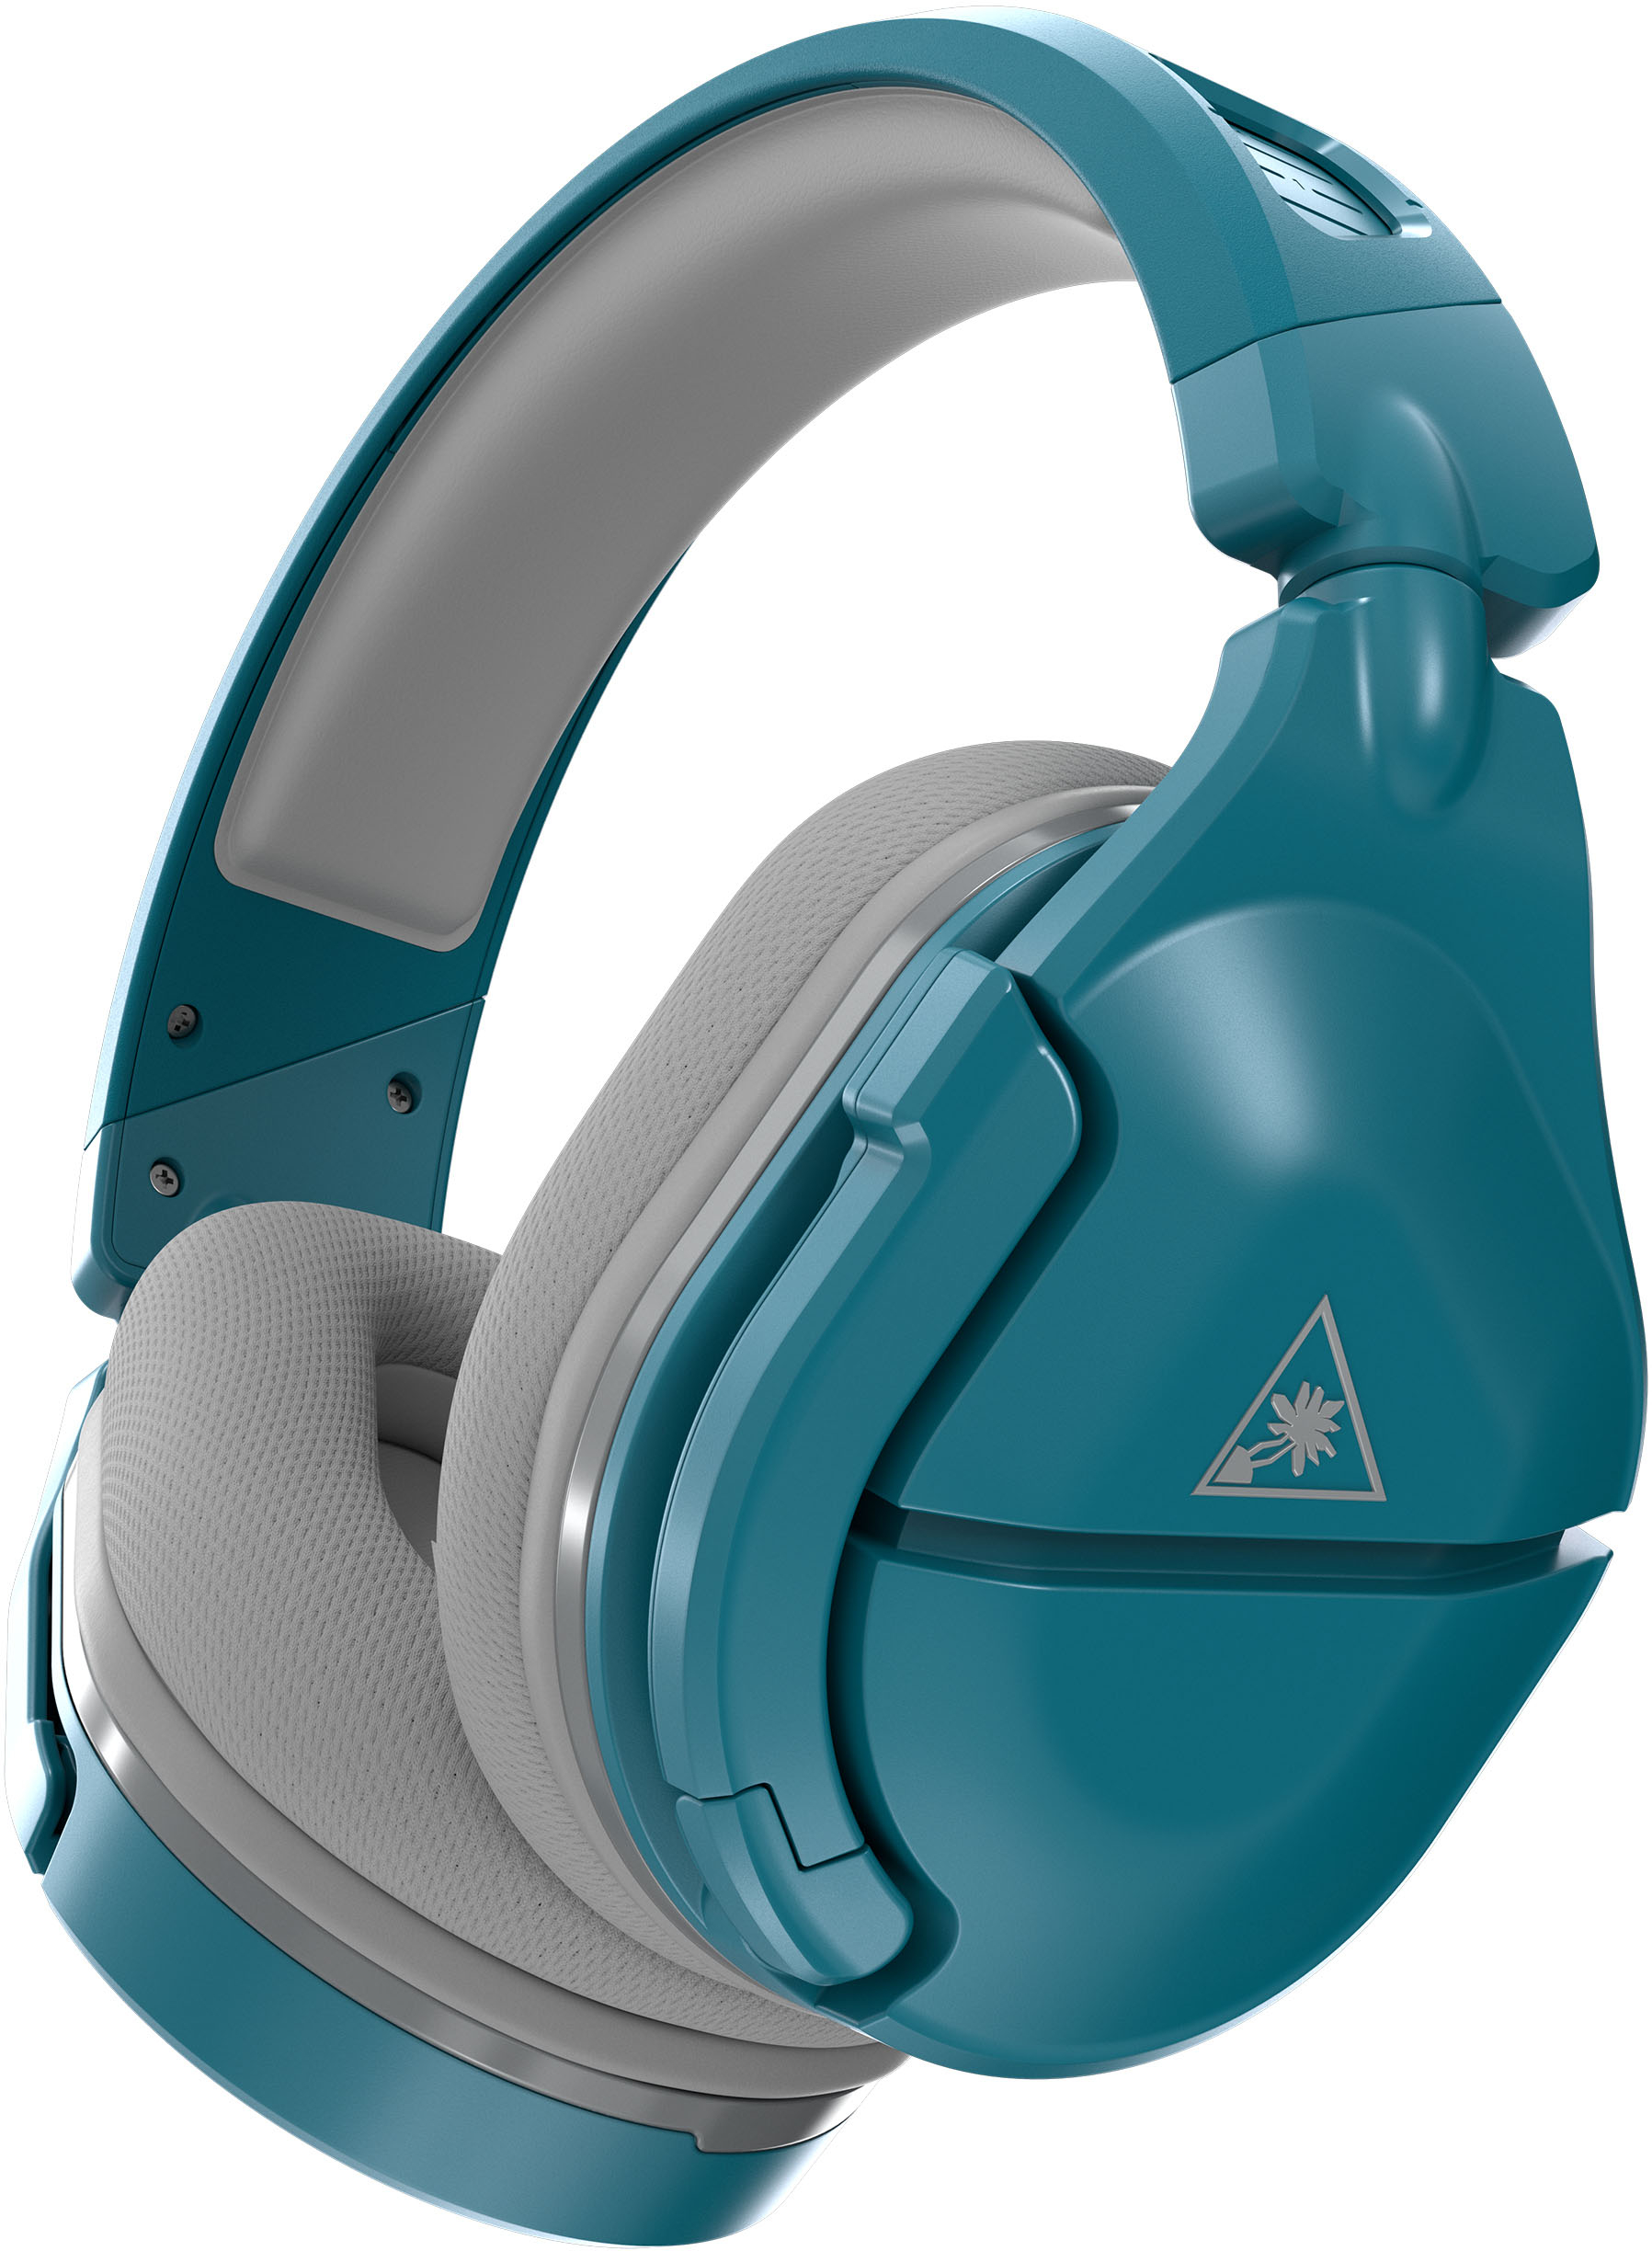 Beach Stealth 600 Gen 2 MAX Multiplatform Gaming Headset Xbox, PS5, PS4, Nintendo Switch and PC 48 Hour Battery Teal TBS-2382-05 - Best Buy